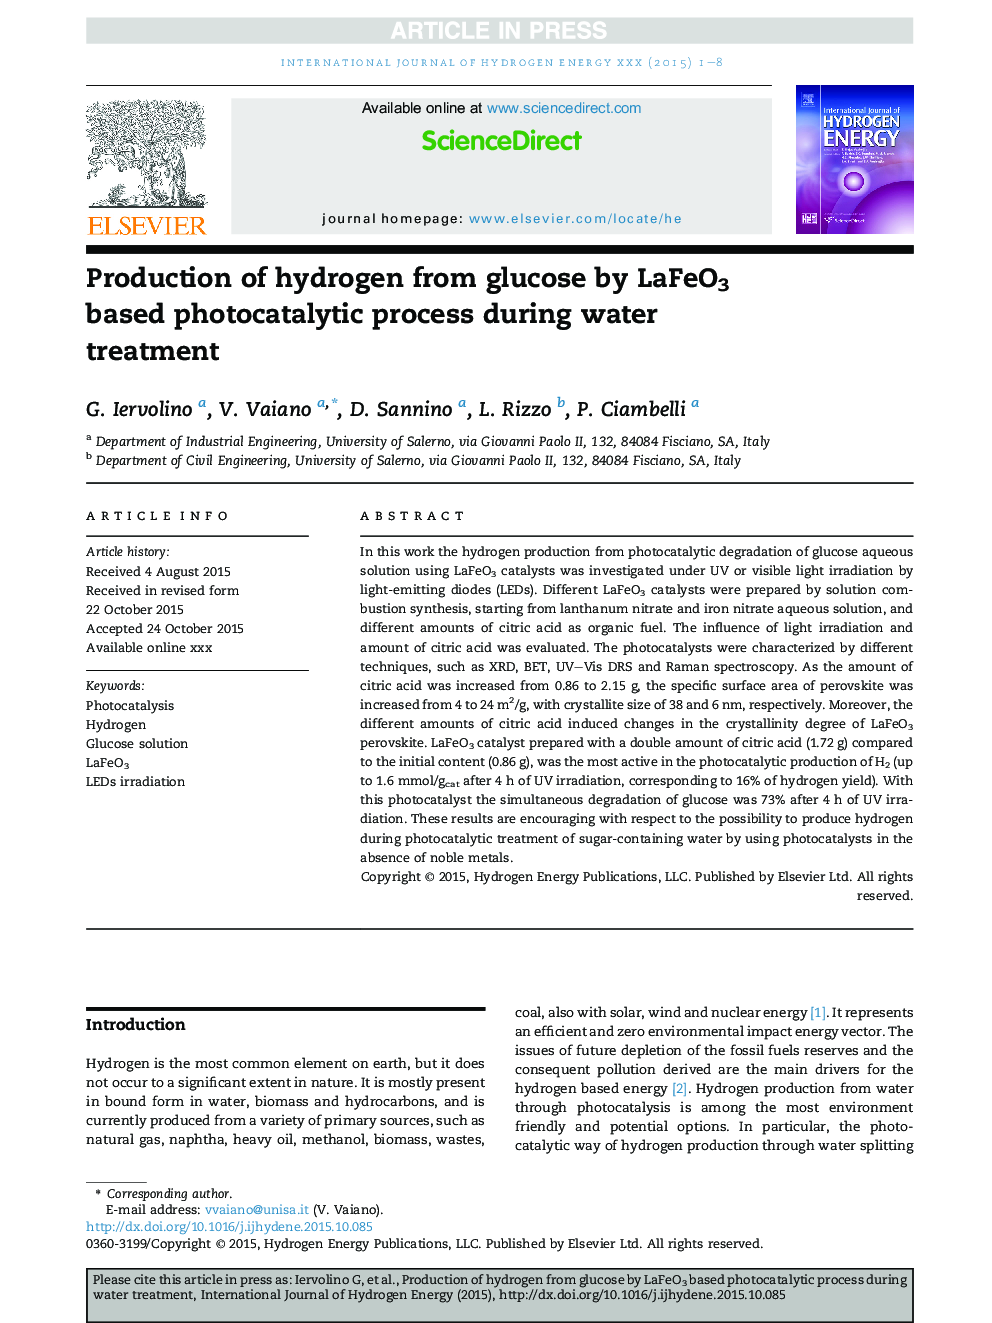 Production of hydrogen from glucose by LaFeO3 based photocatalytic process during water treatment